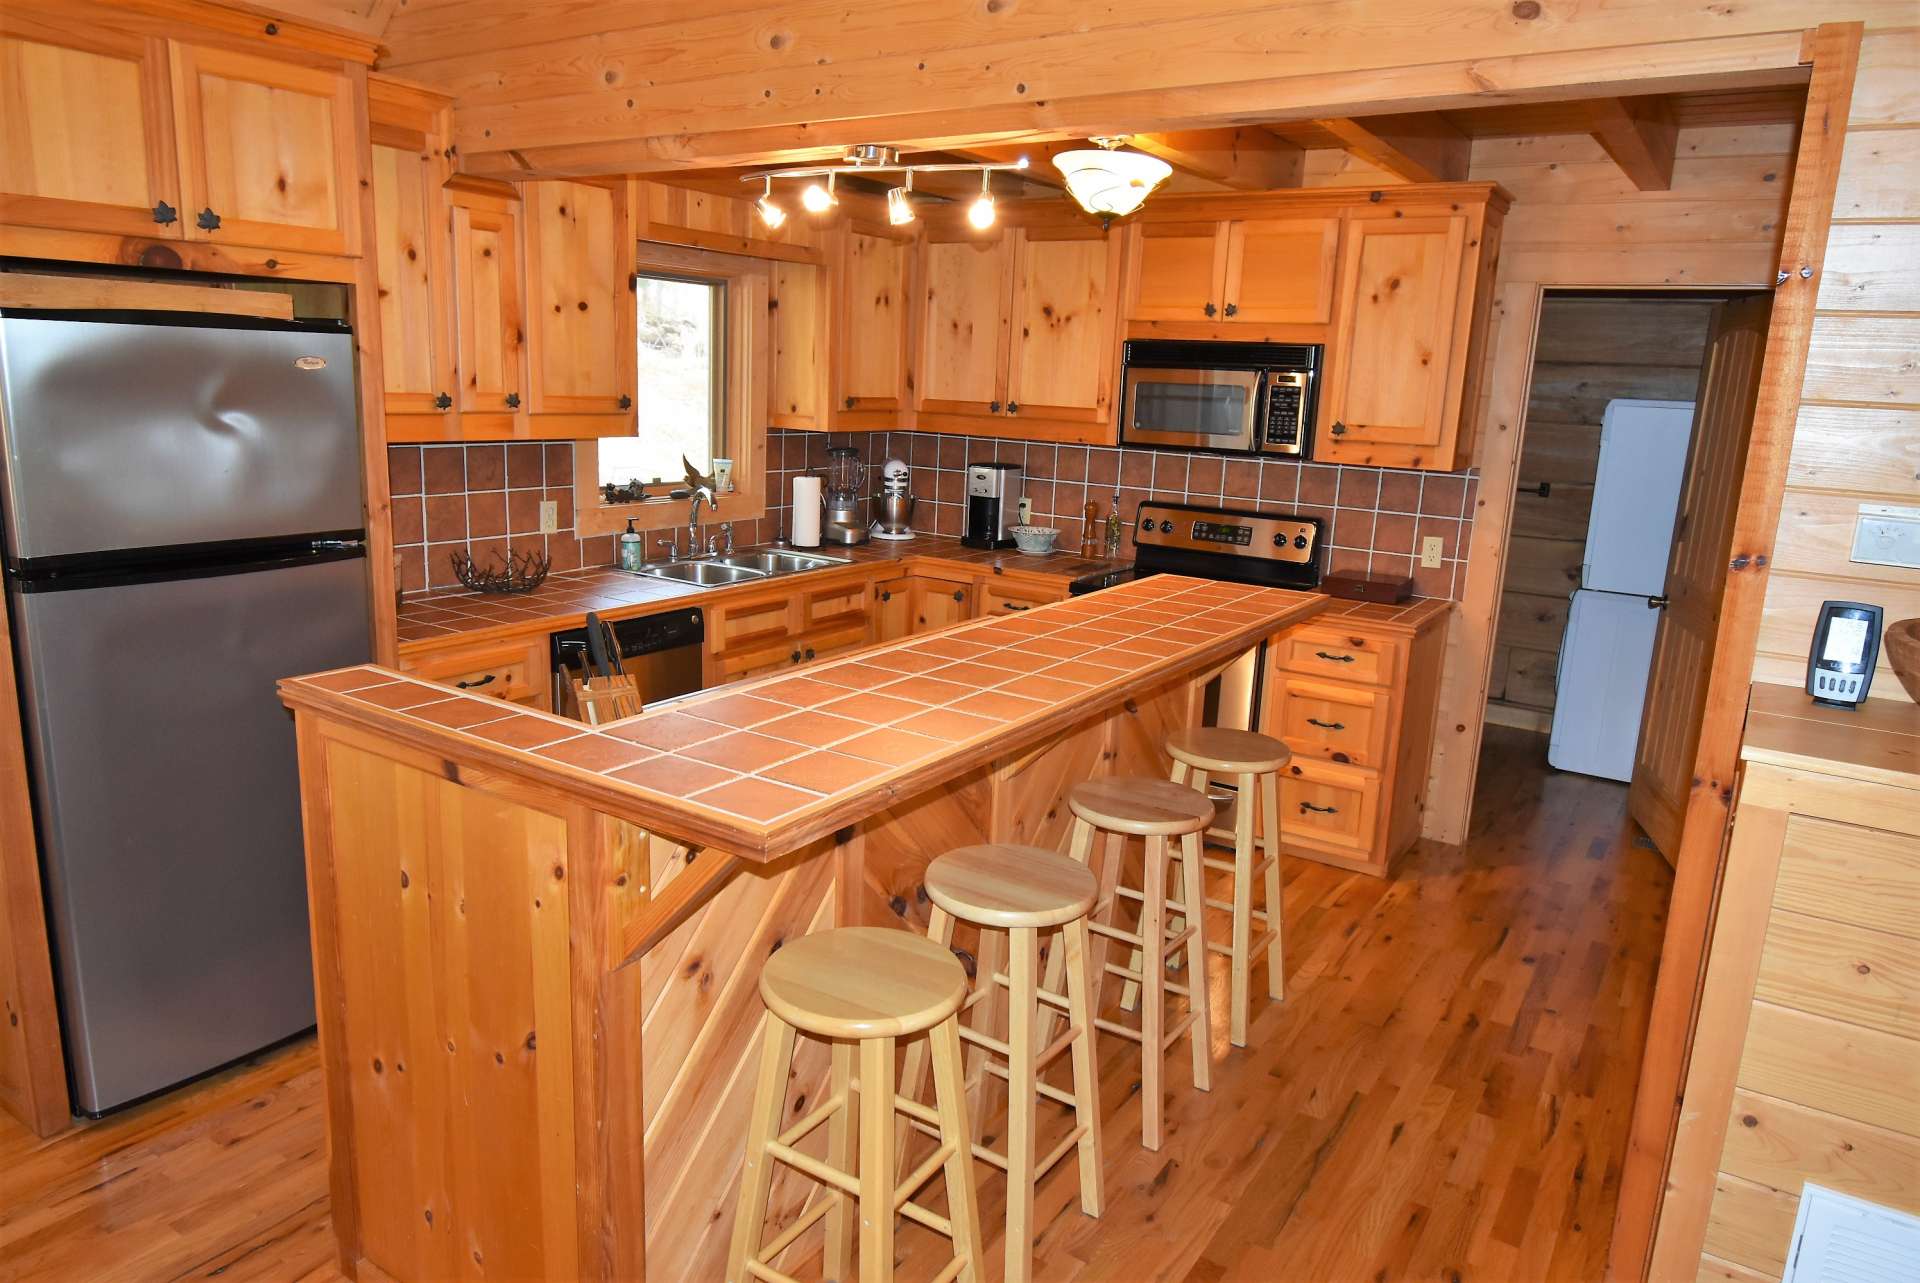 Open to the living and dining areas, this efficient log cabin kitchen offers ample work and storage space that includes a bar with seating for informal dining.